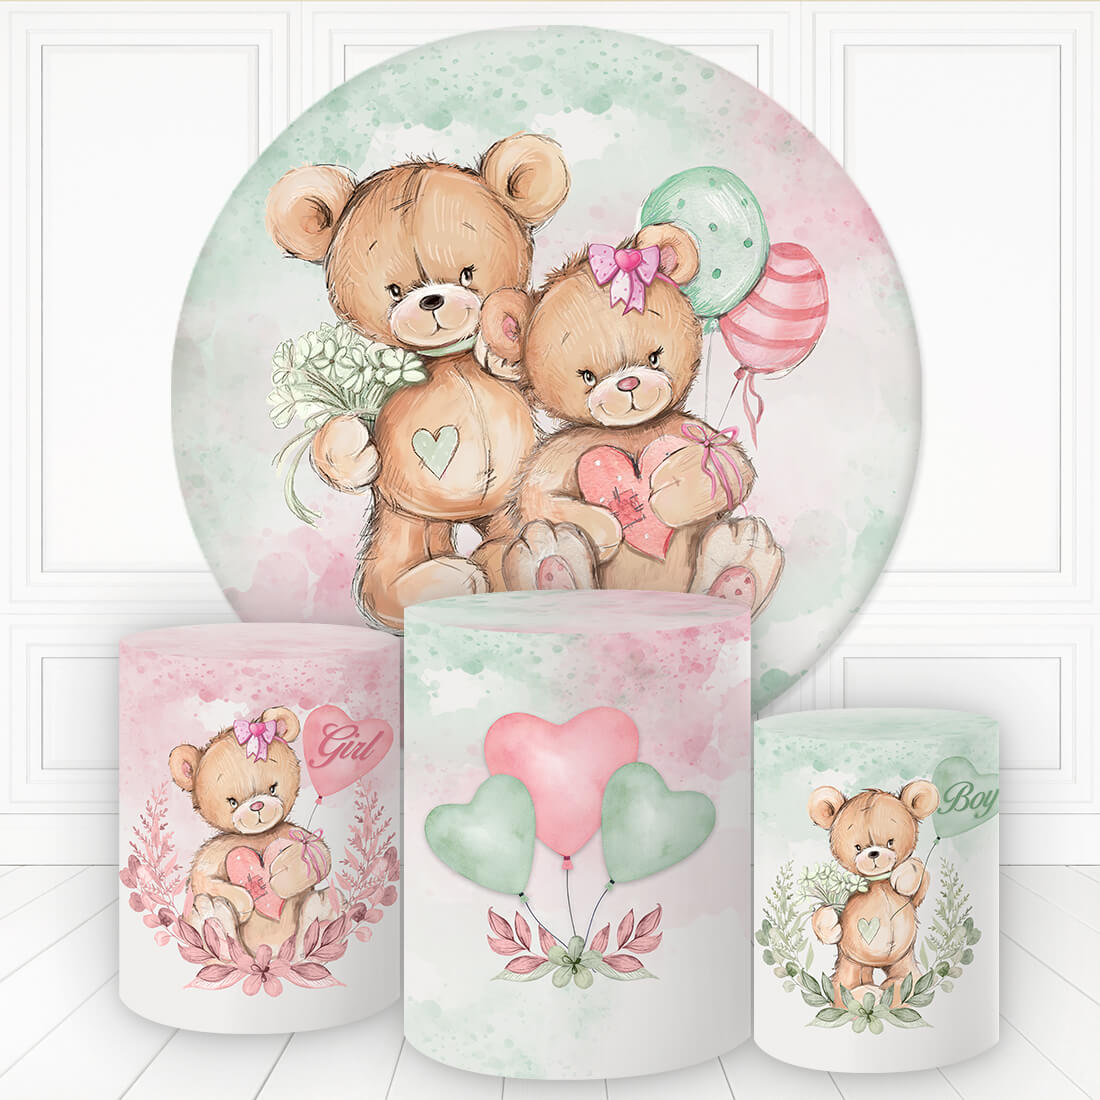 Lofaris Twin Bears With Balloon Round Backdrop Kit For Baby Shower